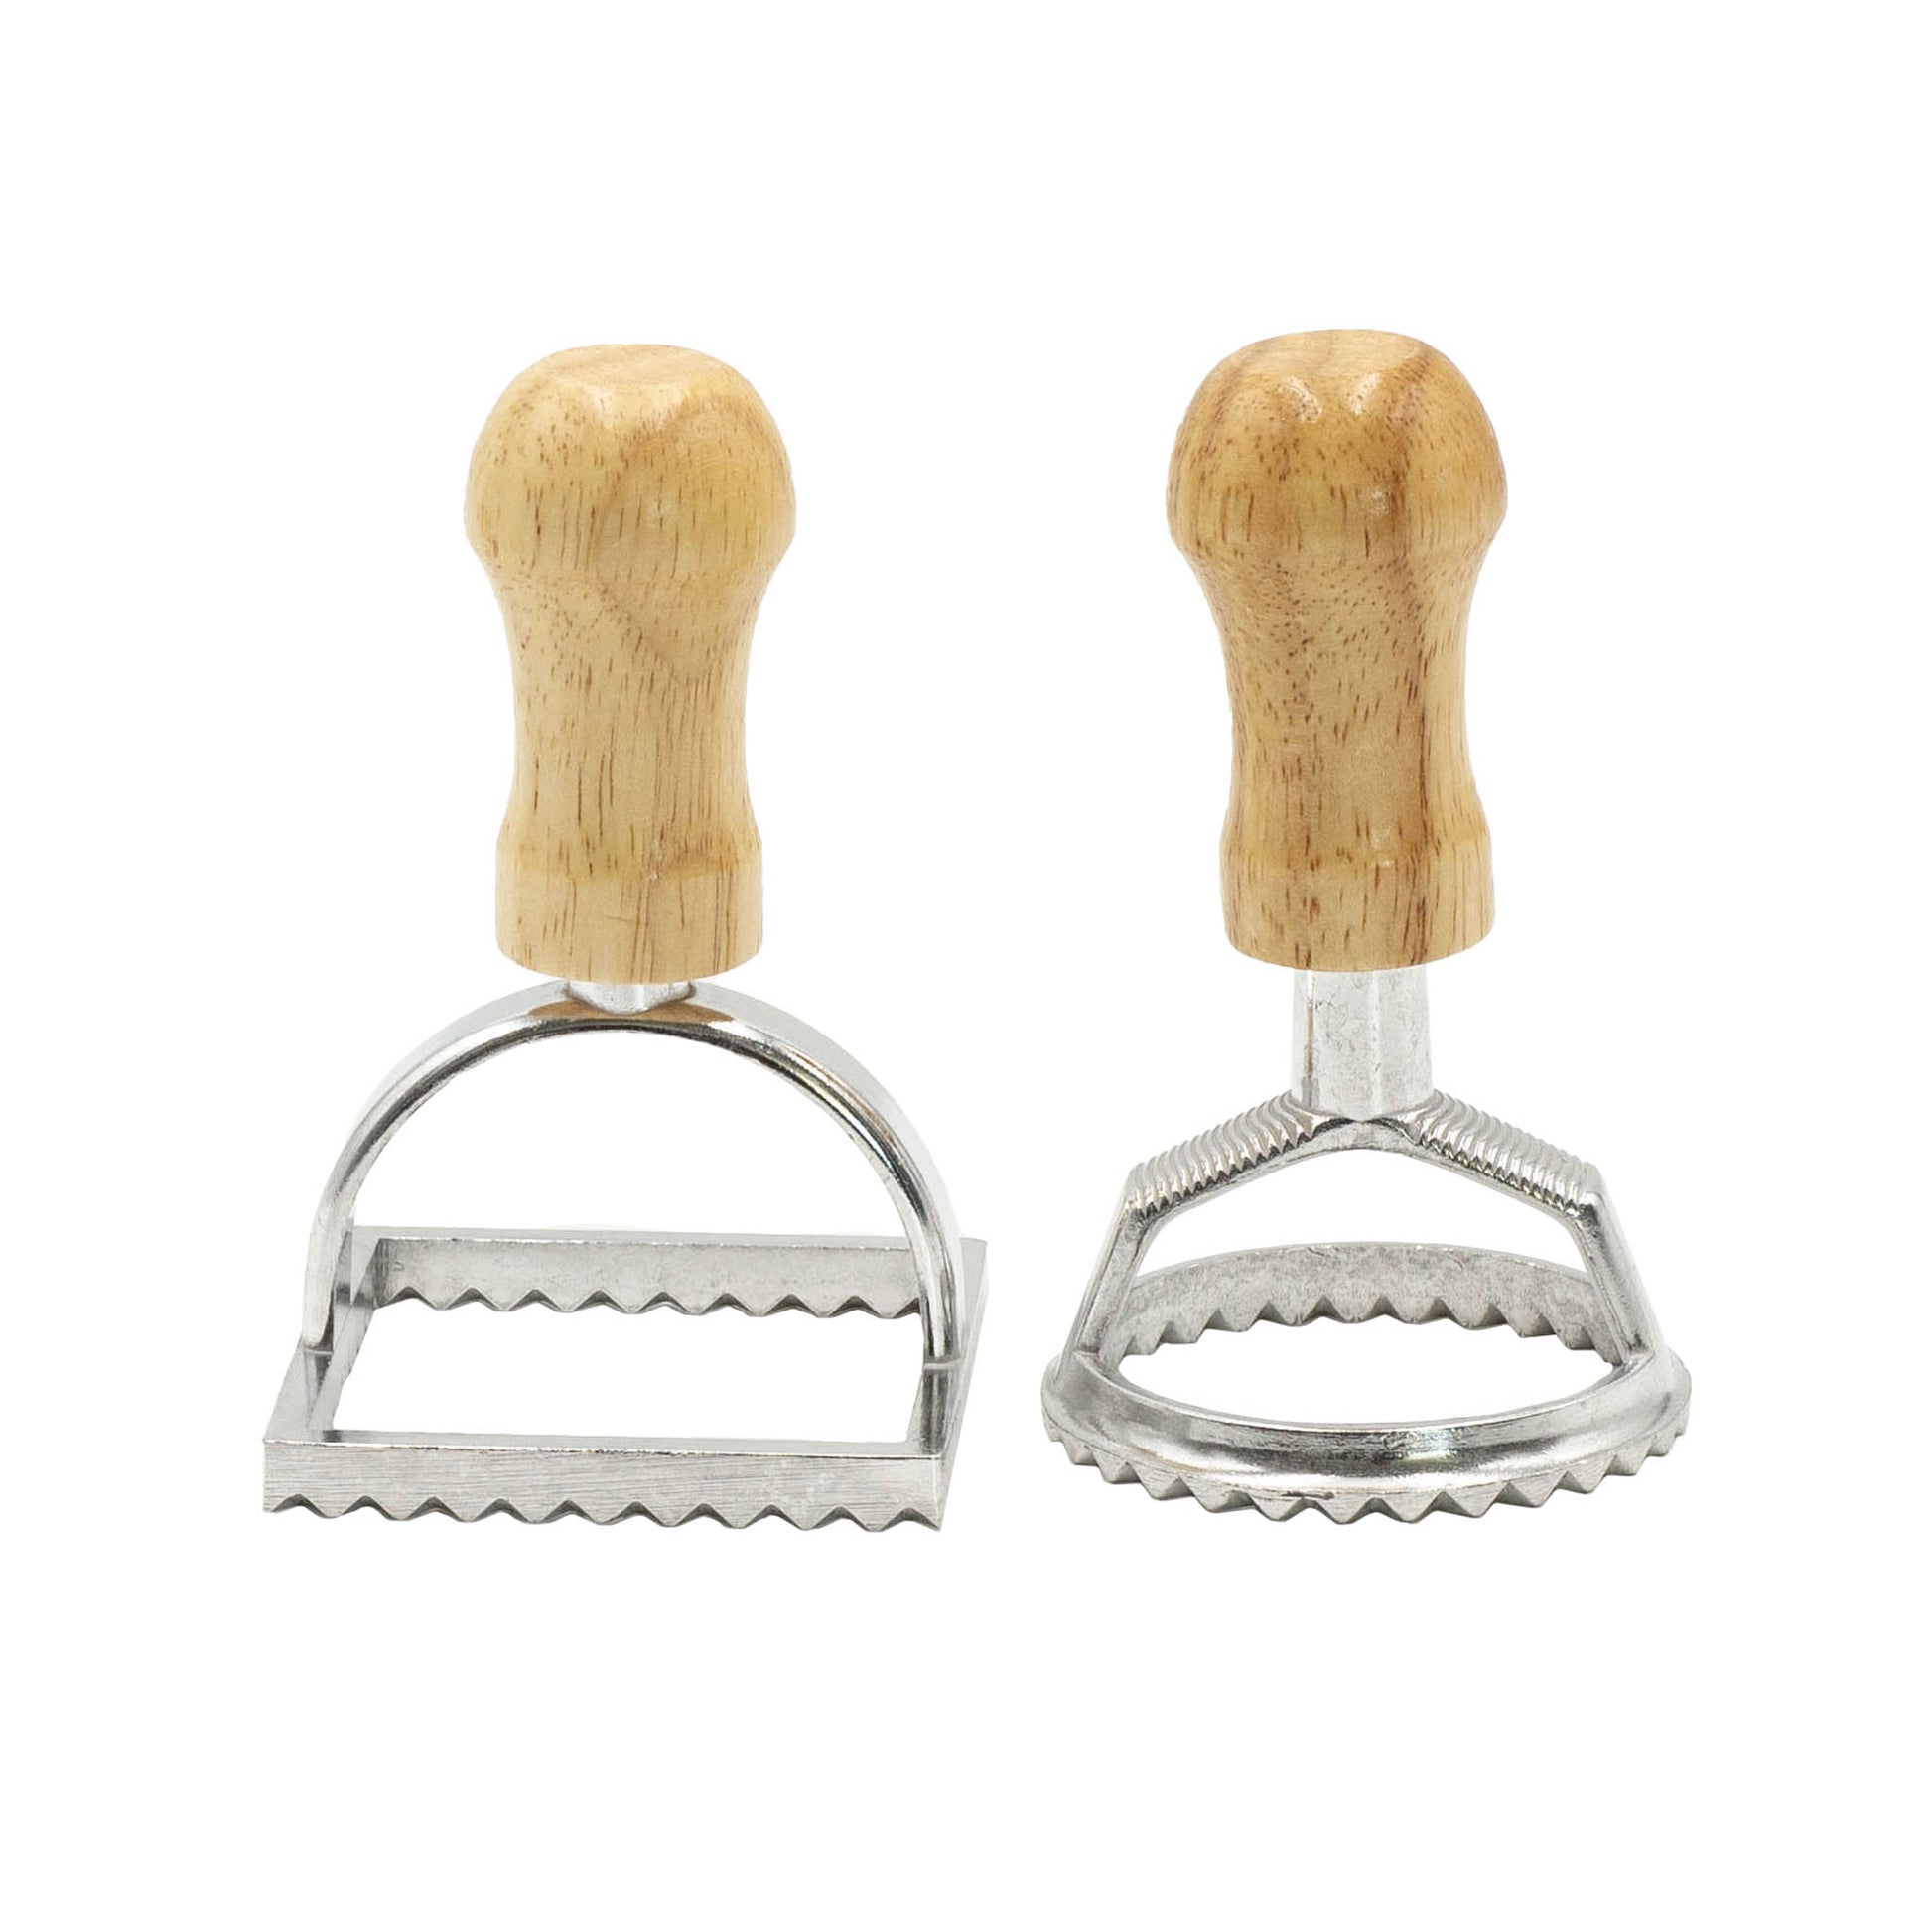 Stainless Steel ravioli cutters with wooden handle. 